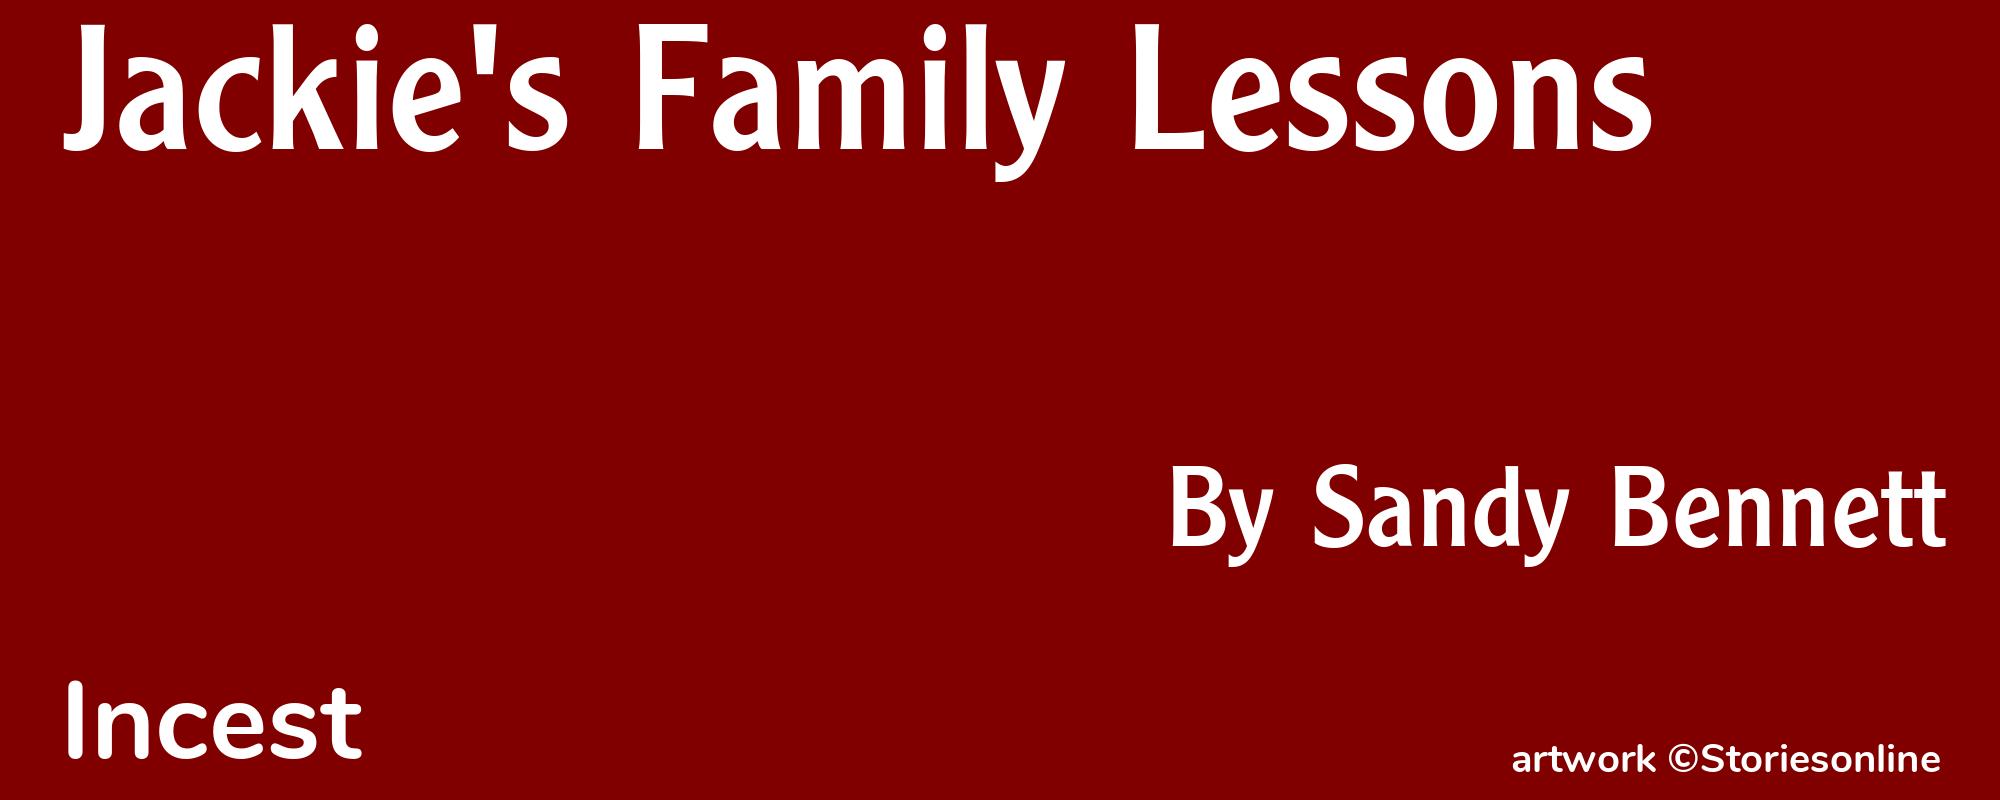 Jackie's Family Lessons - Cover